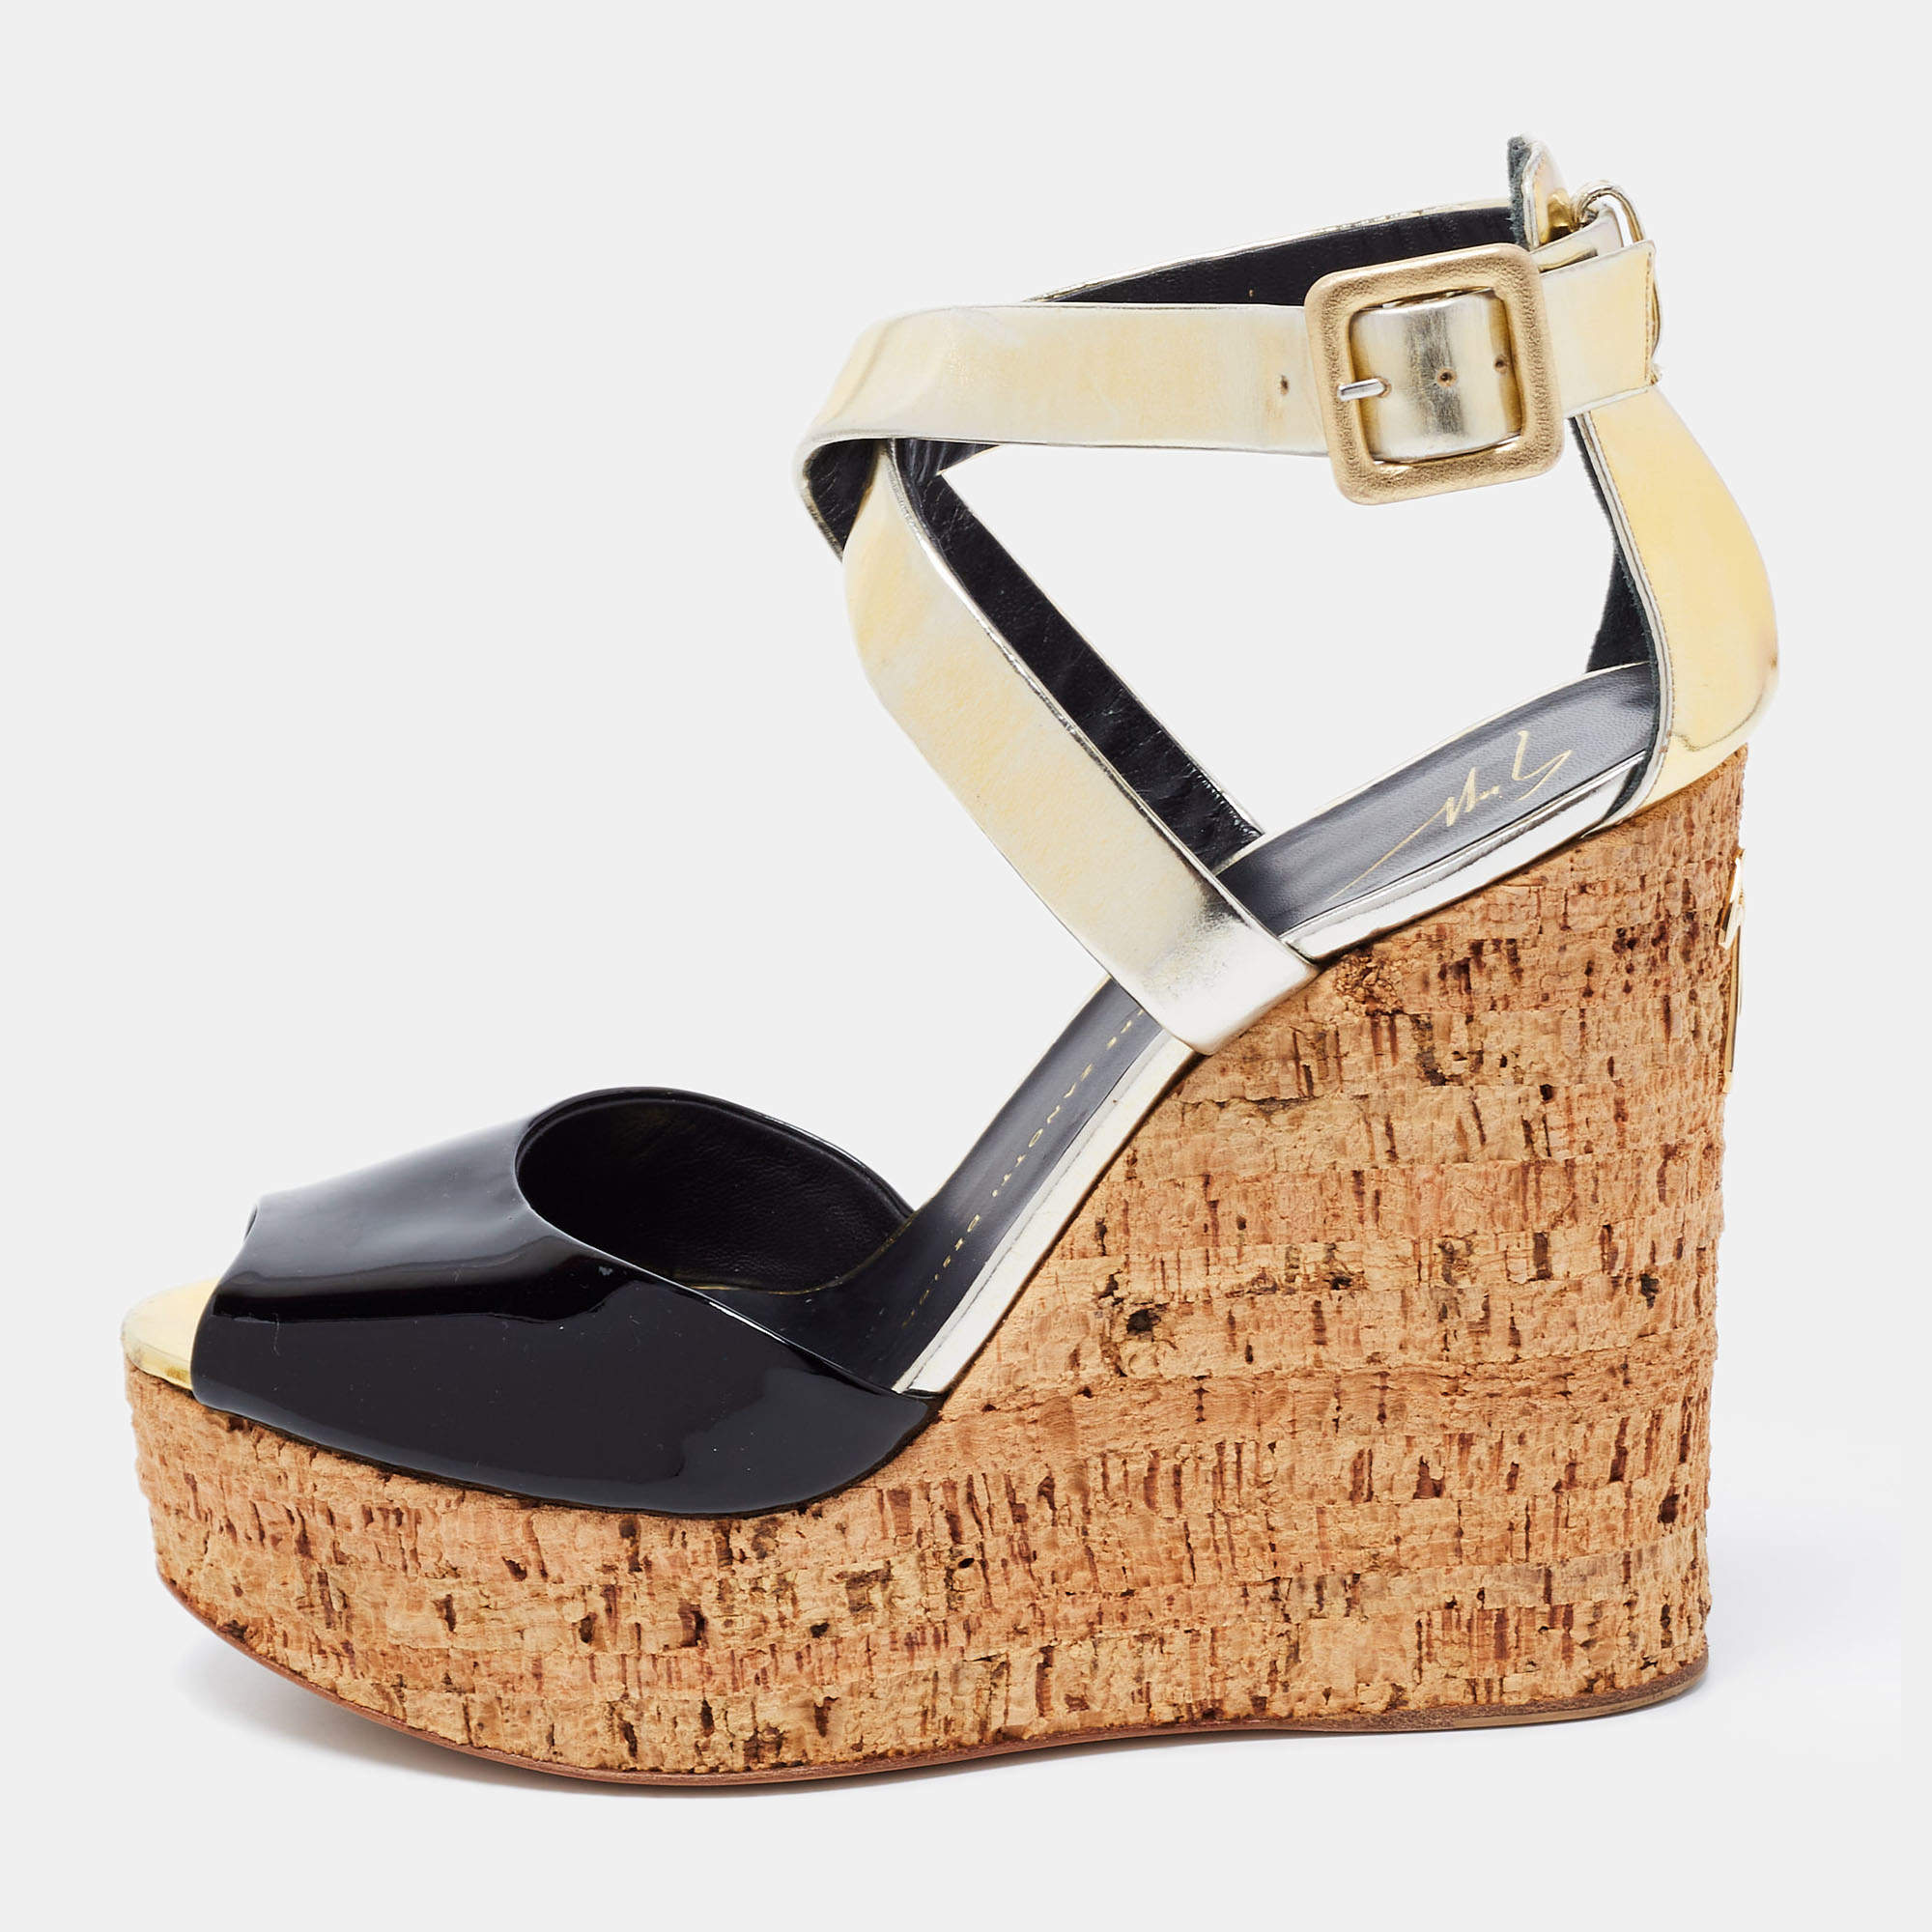 Buy Wedges for Women Online - Metro Shoes